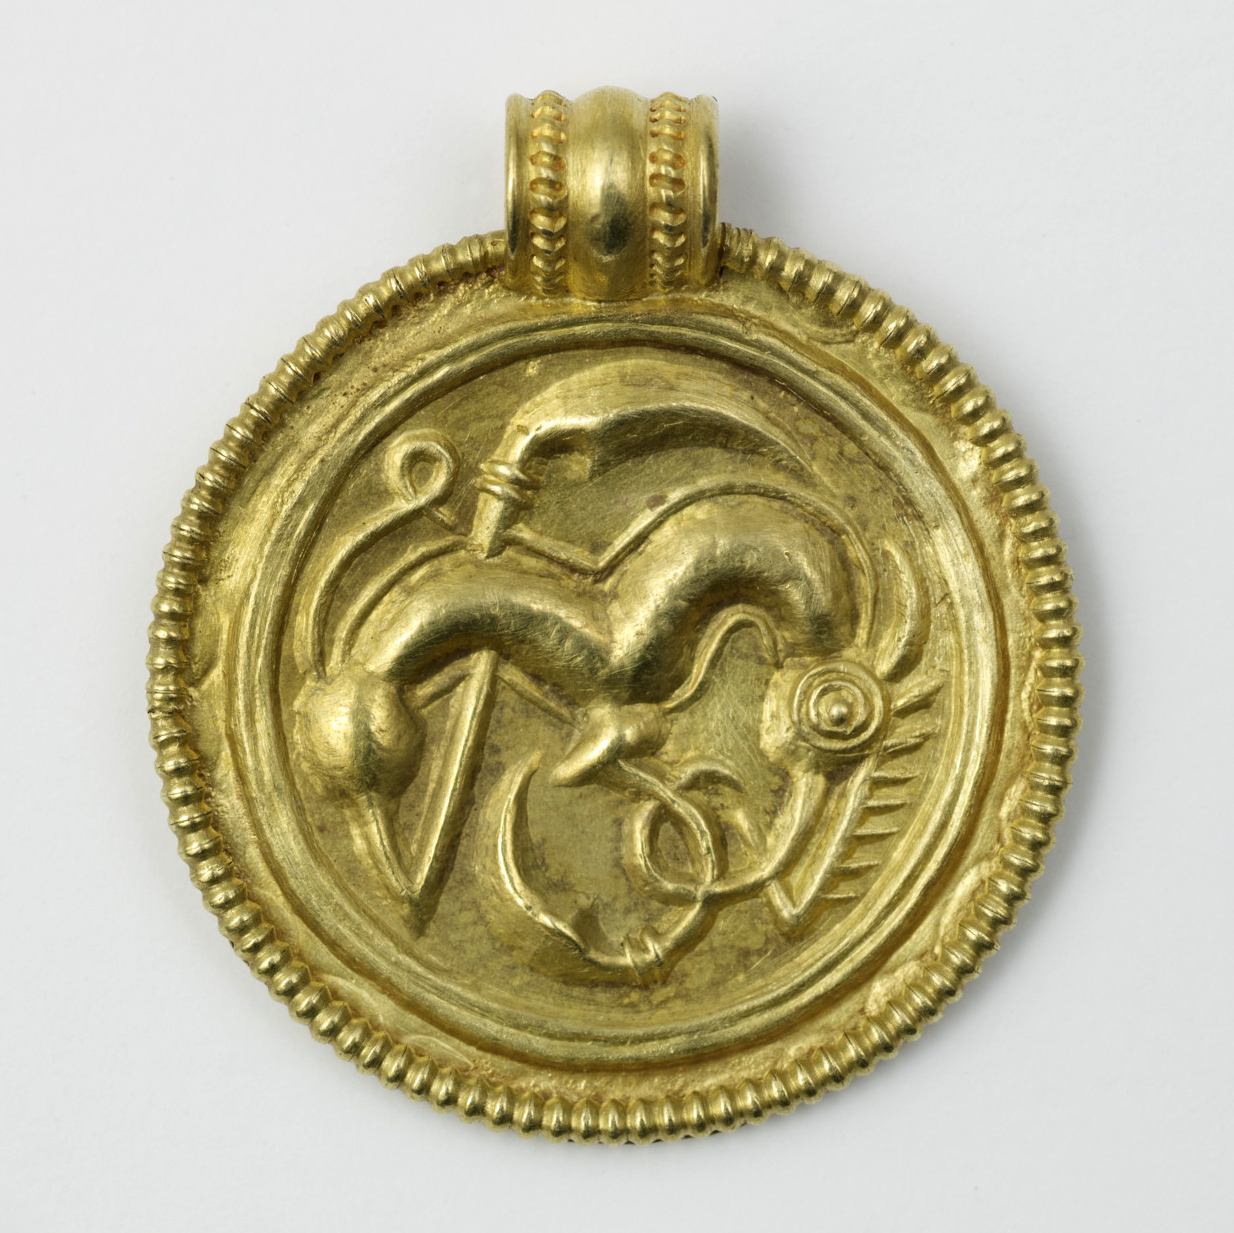 Bracteate. Voll, Rogaland, Norway. Arkeologisk Museum, Stavanger, S938. Photo: Terje Tveit (CC BY-NC-ND 01).